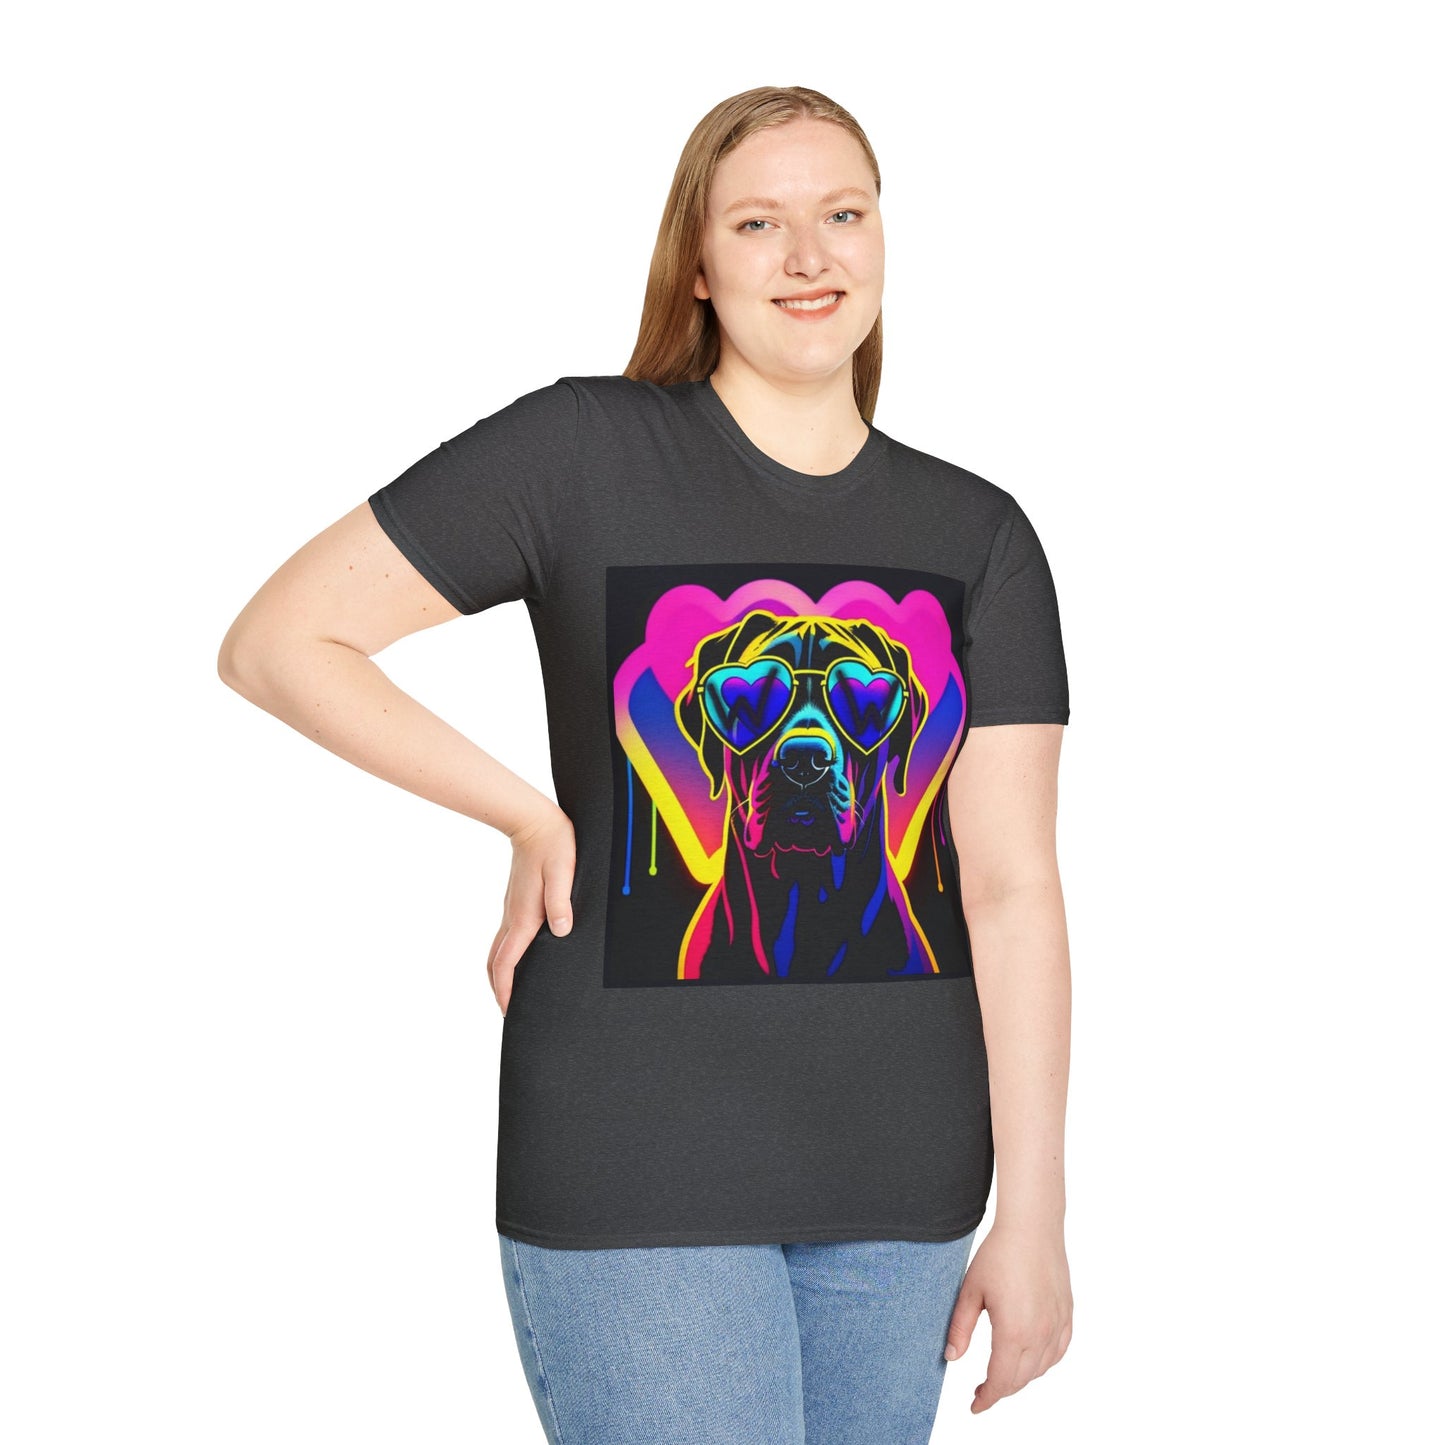 Brody's Electric Love Graphic Tee